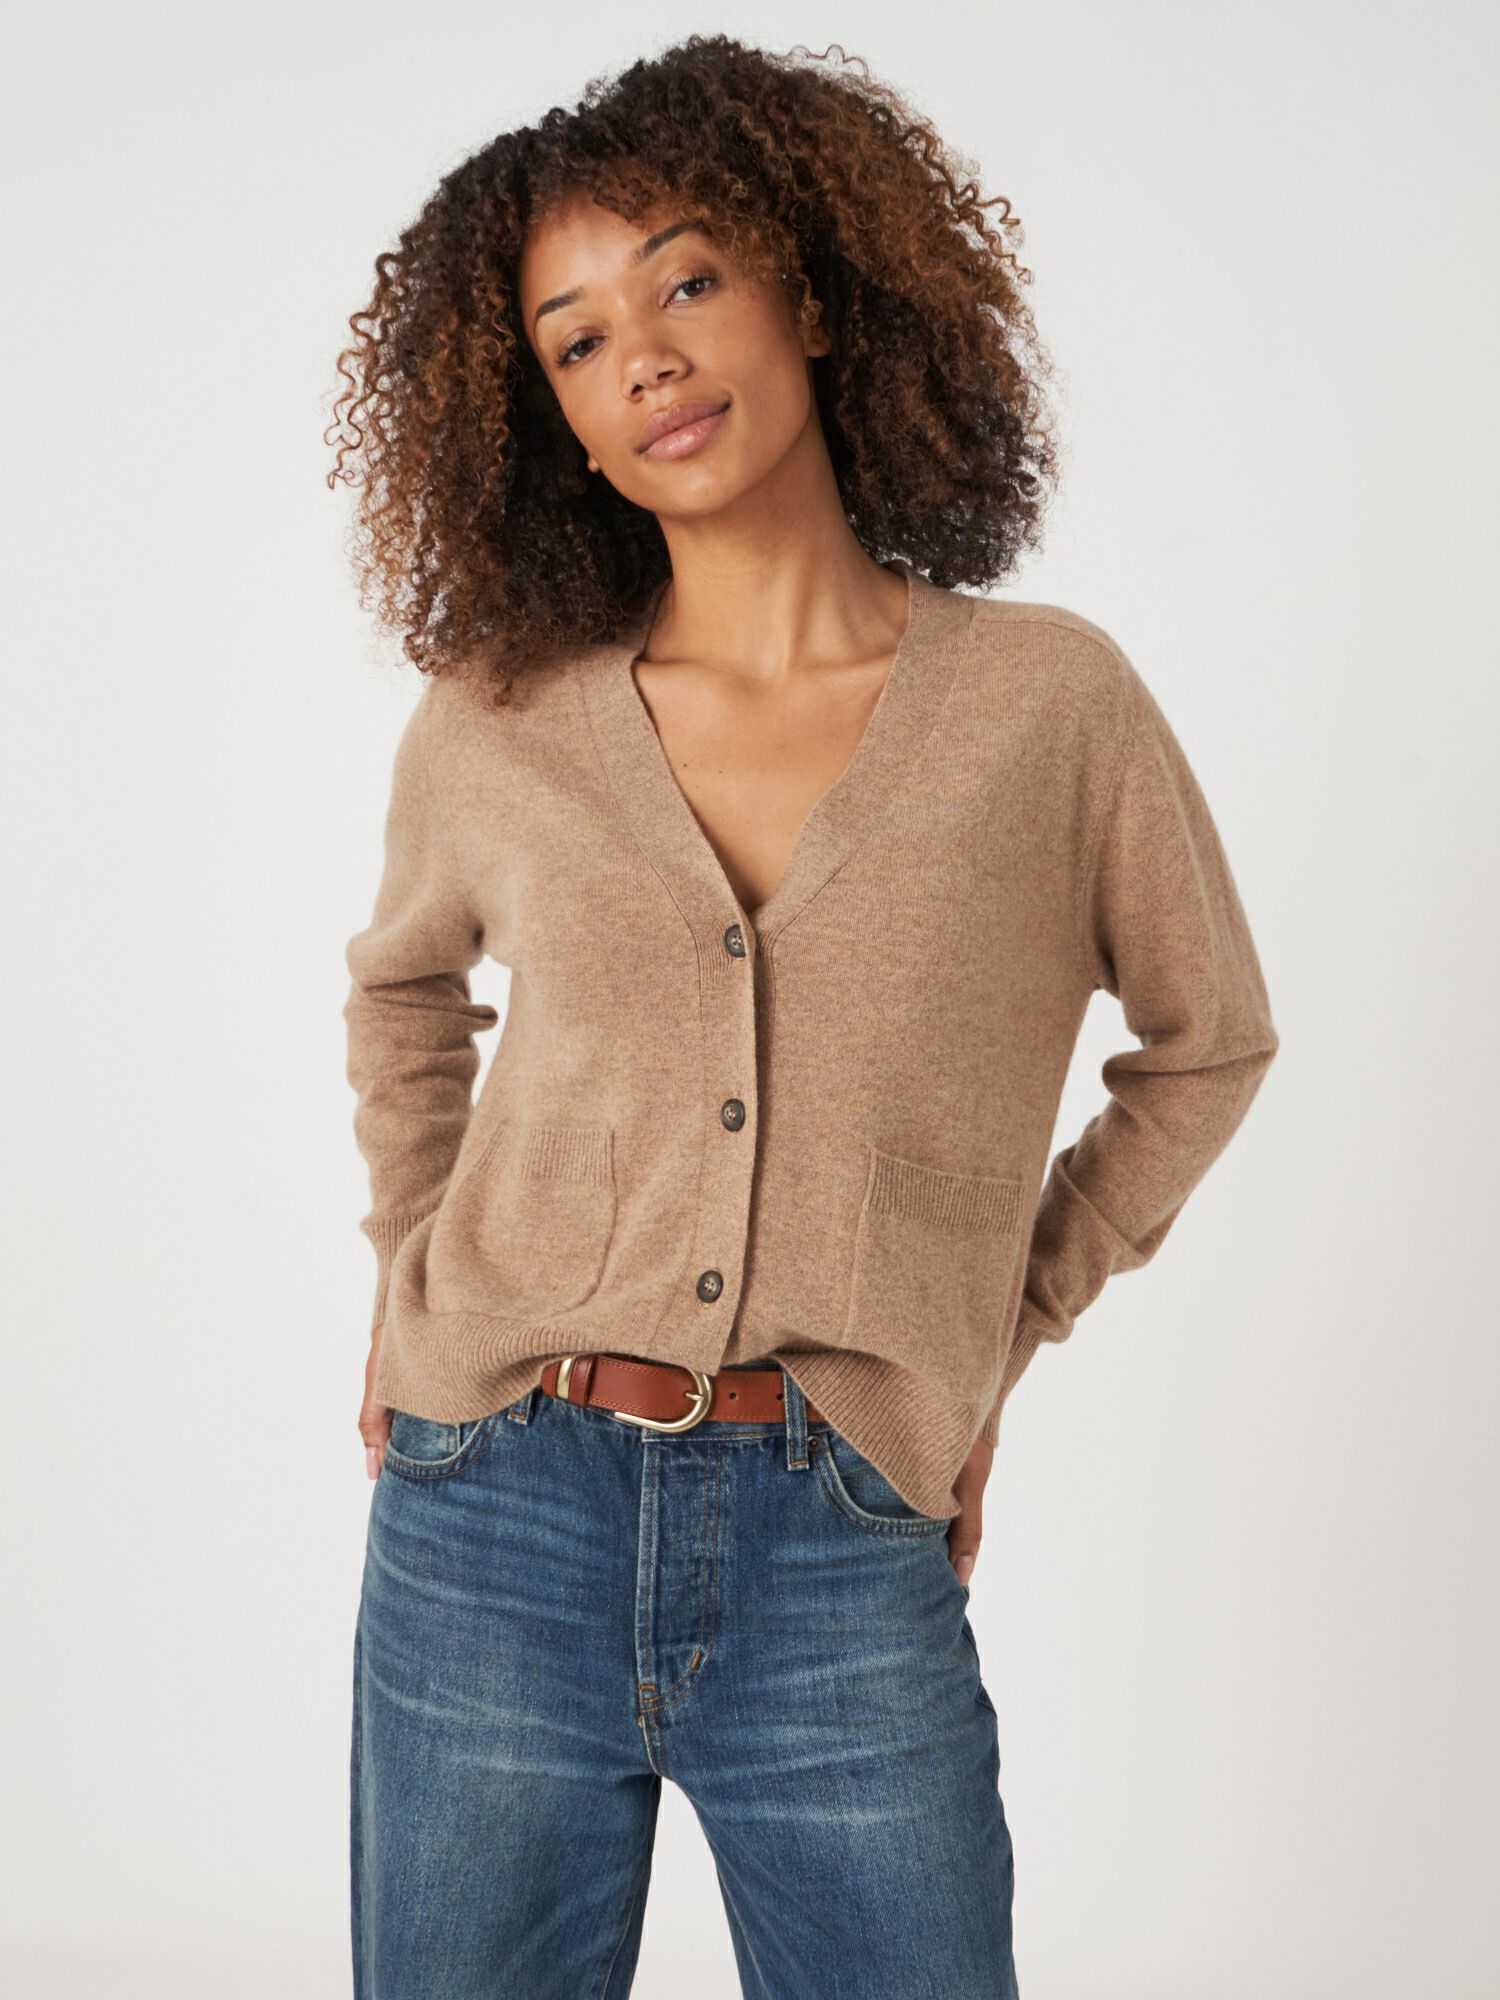 Lightweight soft knit cashmere cardigan with pockets